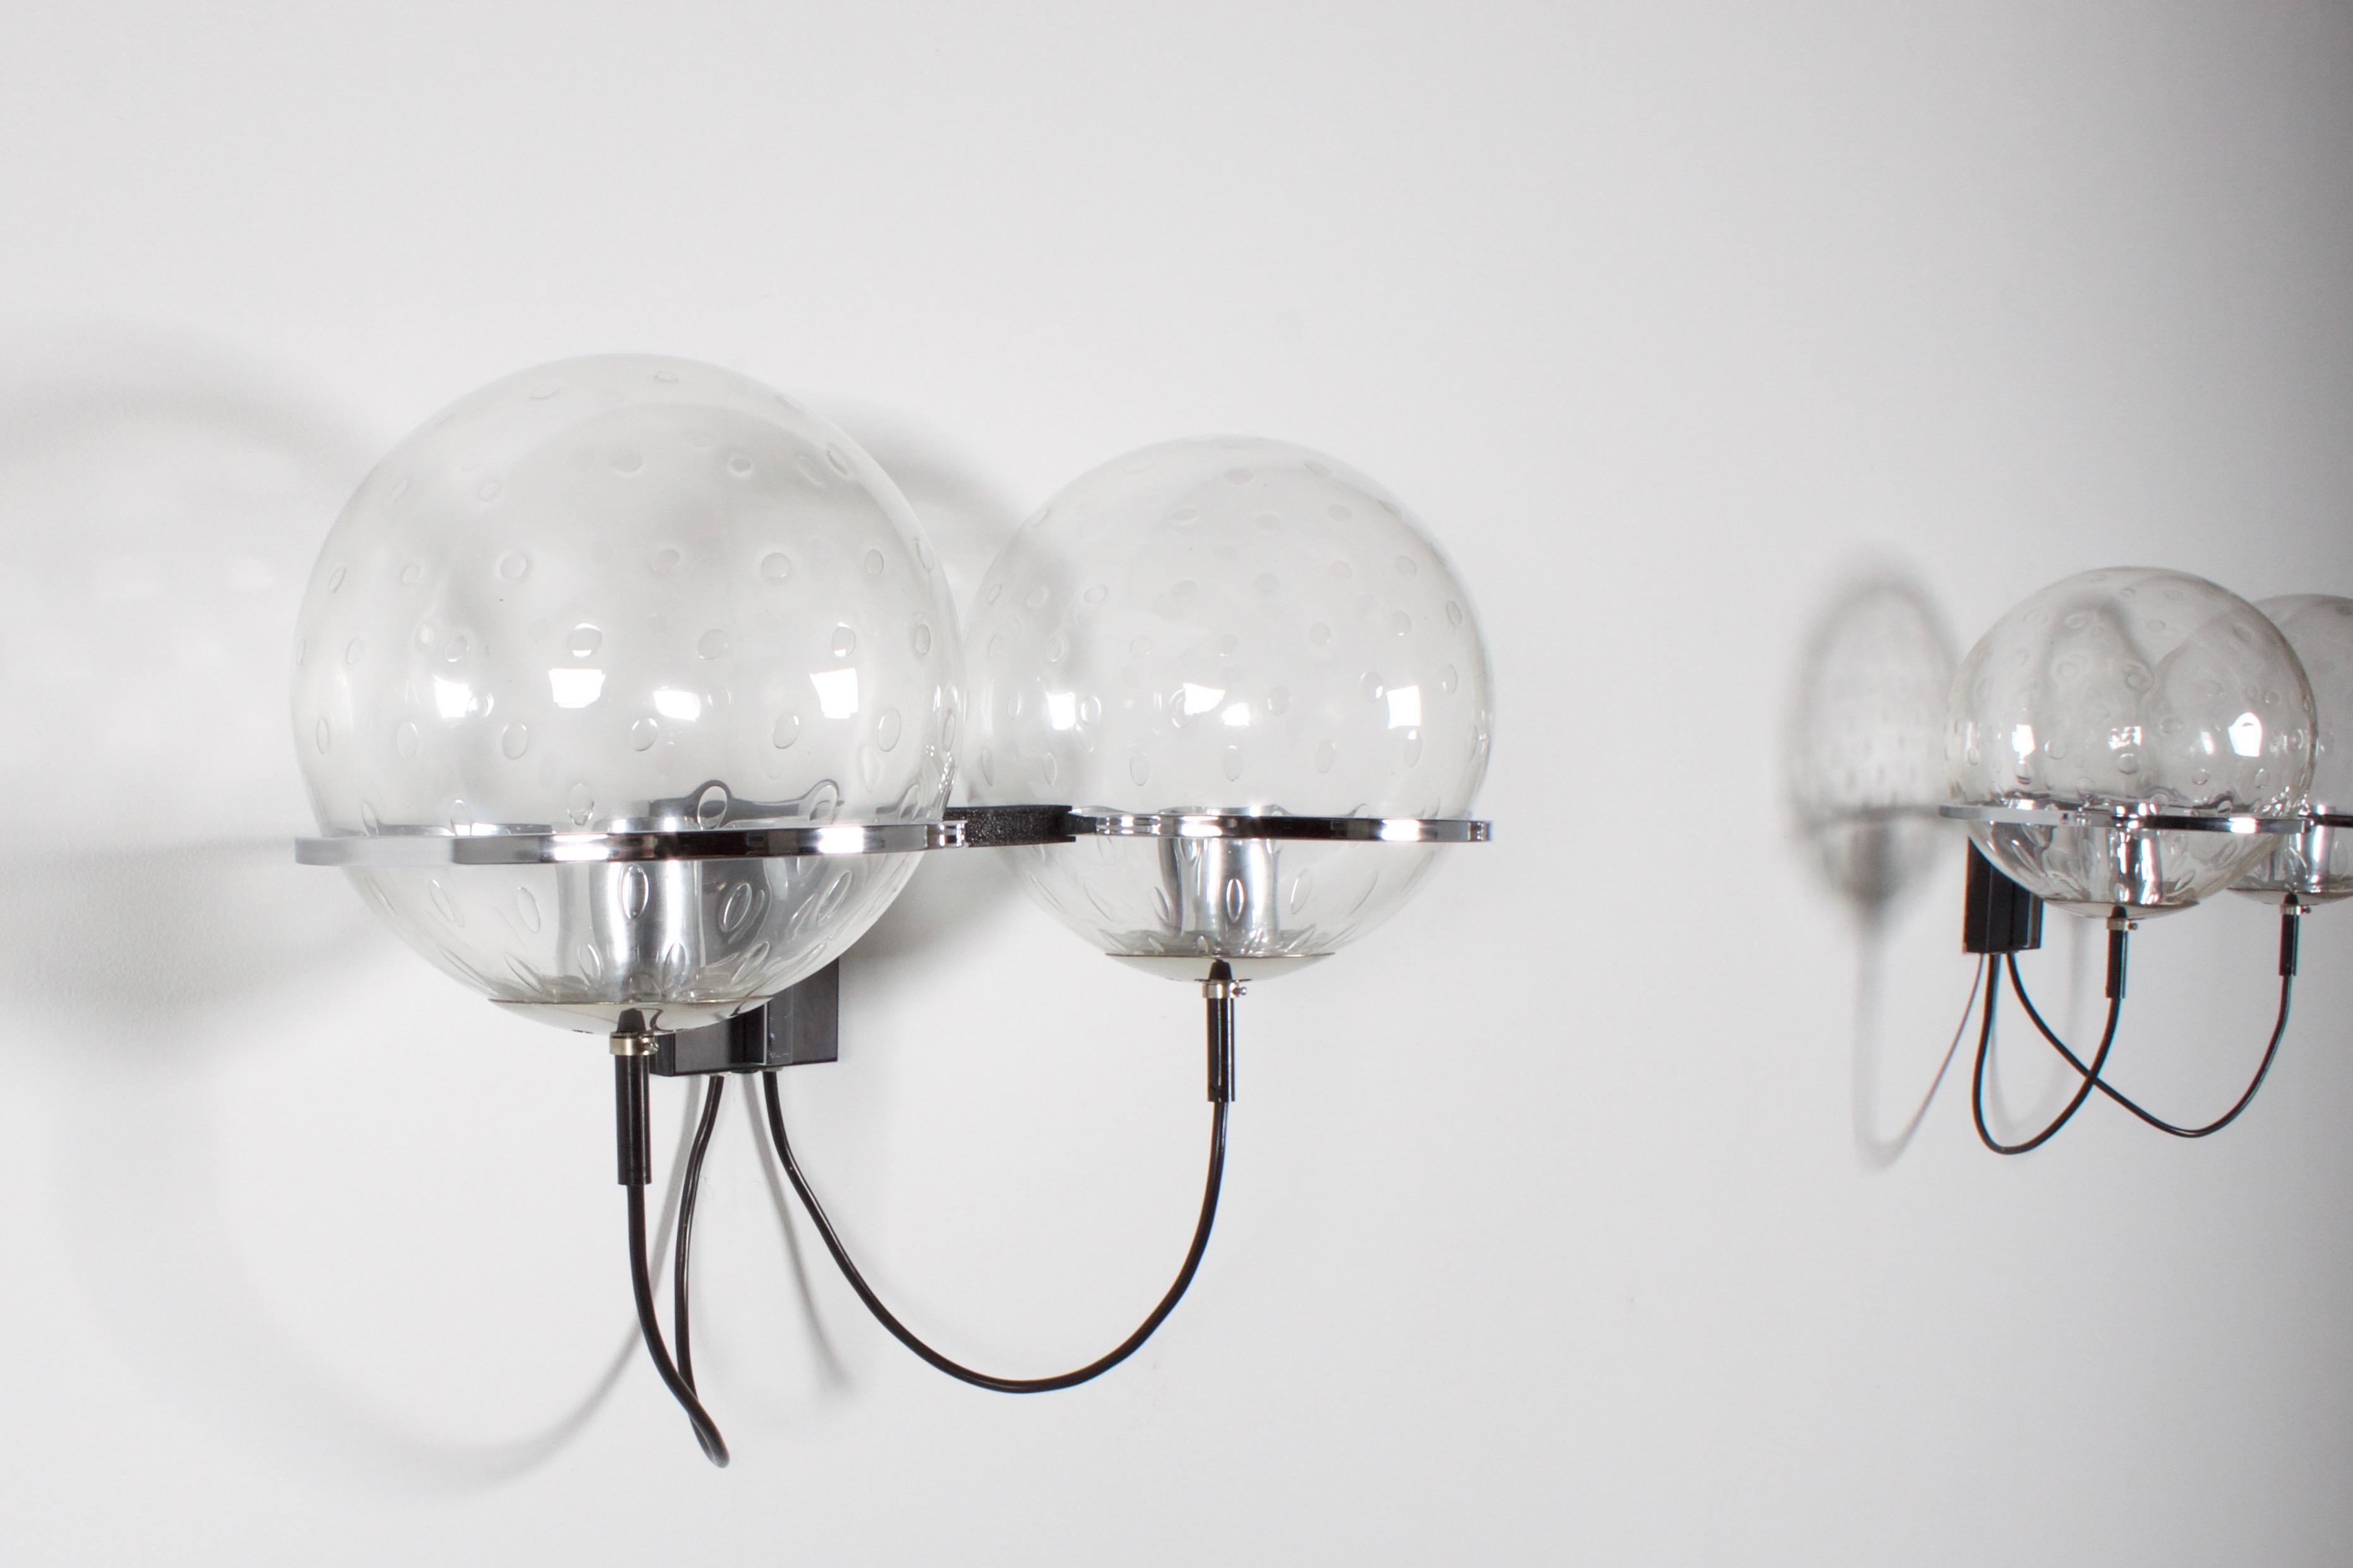 Pair of impressive large C-1726 sconces by RAAK Amsterdam in very good condition.

Designed by Frank Ligtelijn in the 1960s 

Each lamp consists of a metal black frame with two chrome rings that hold two 25 cm / 9.85 Inch glass globes.

The